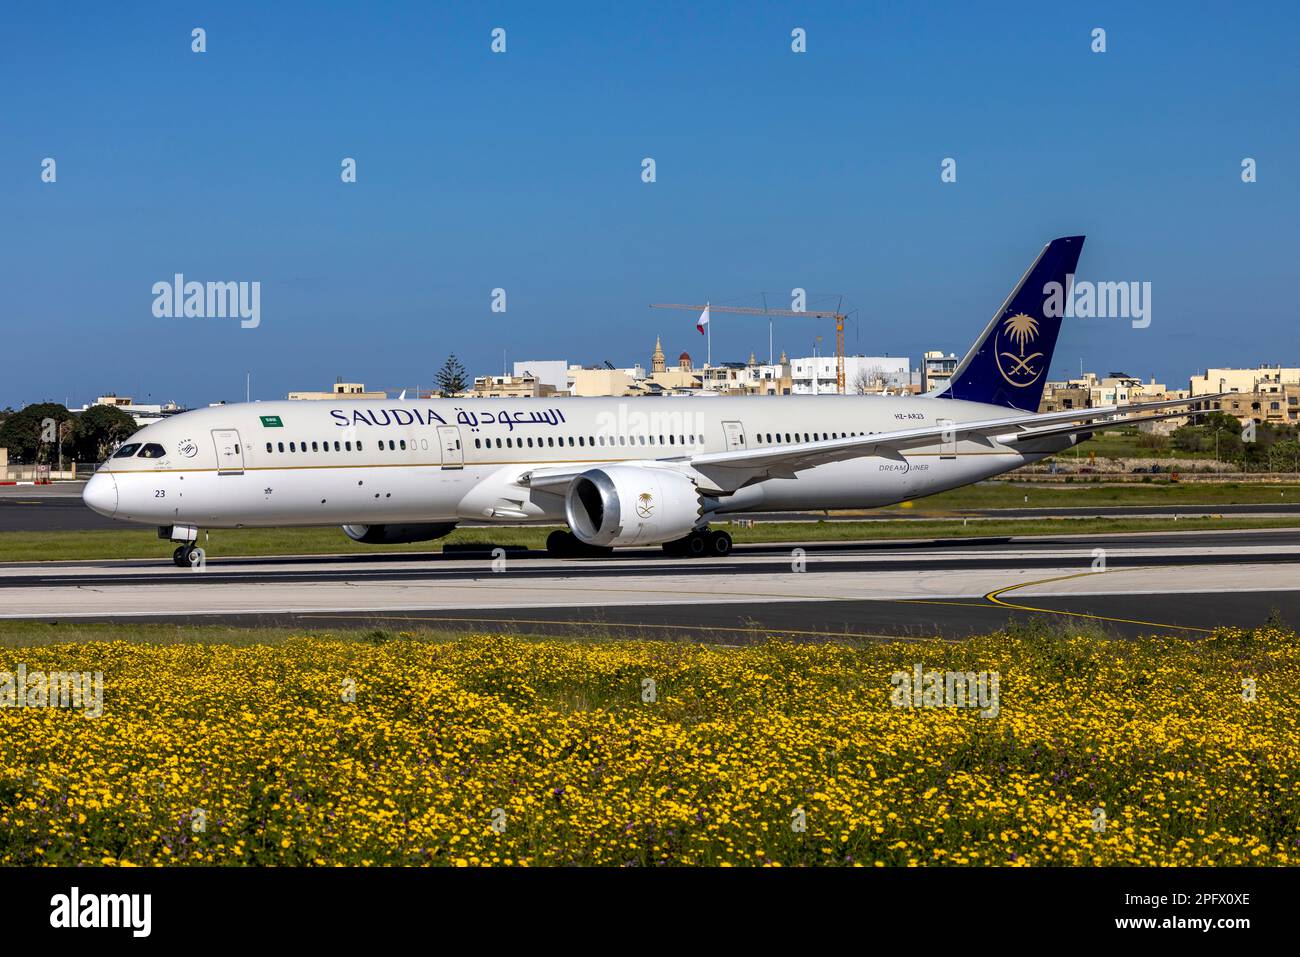 Saudia Saudi Arabian Airlines Boeing 787-9 Dreamliner (Reg.: HZ-AR23) departing from Malta after making an emergency landing about 3 hours earlier. Stock Photo